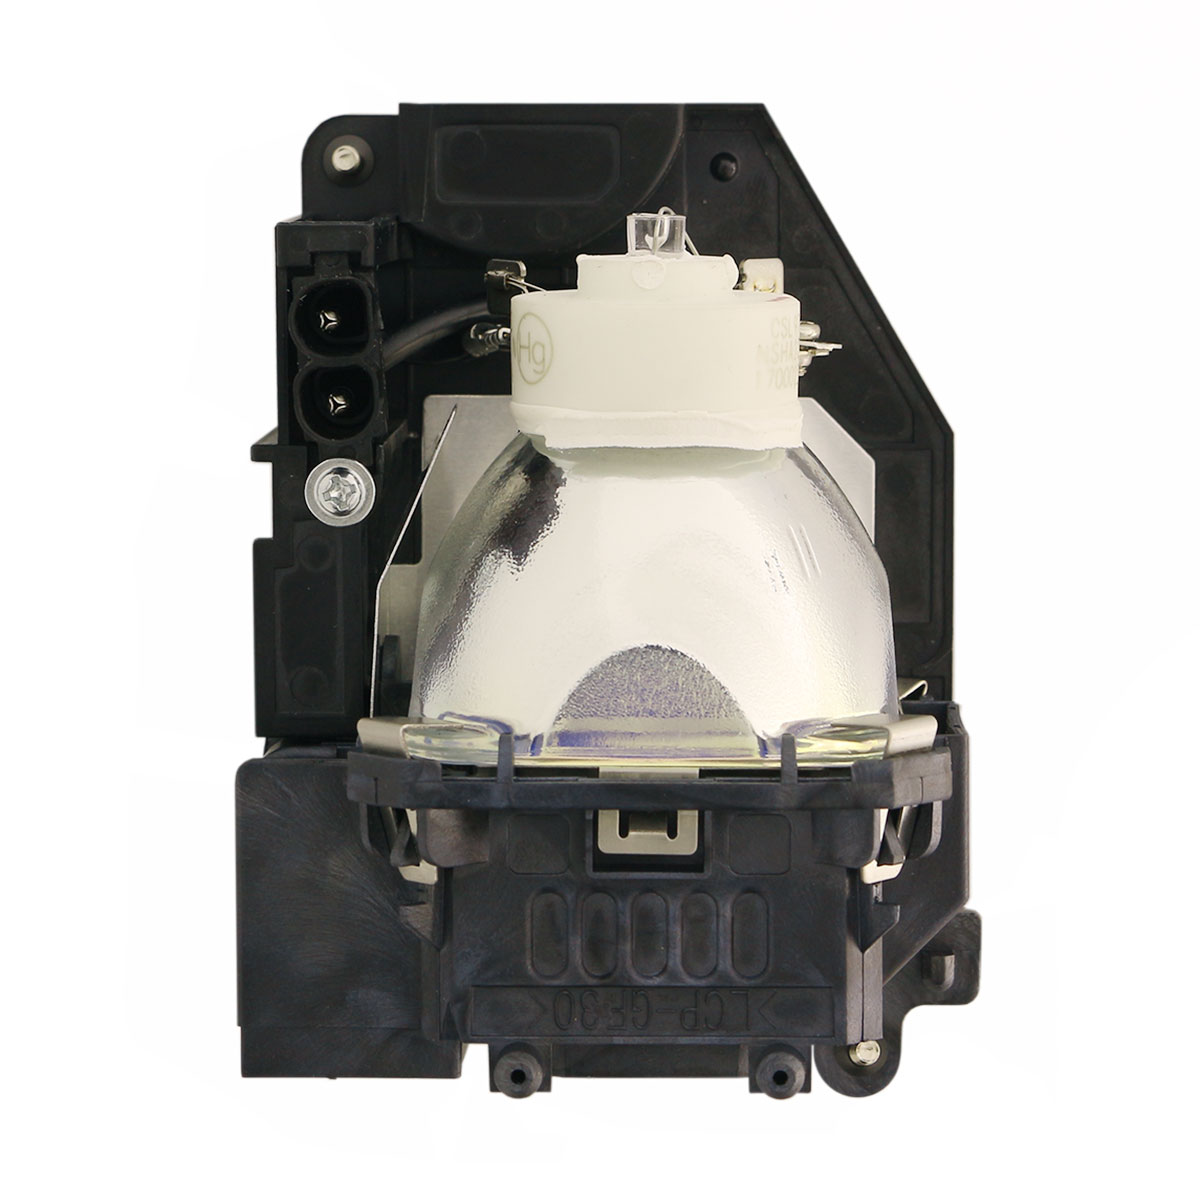 Original Ushio Replacement Lamp & Housing for the NEC M260XS Projector - image 4 of 7